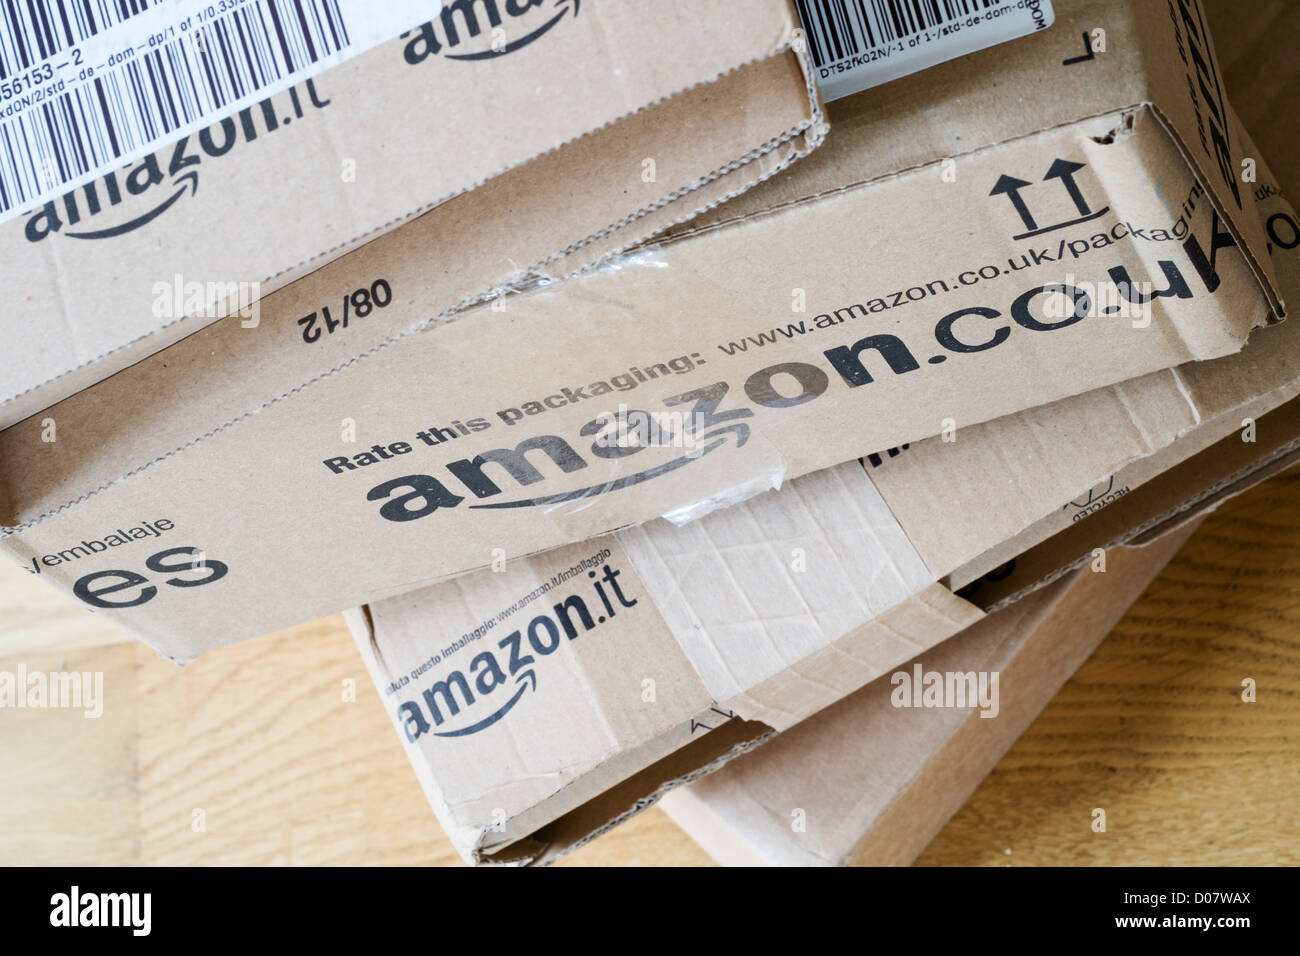 Detail of several boxes from Amazon.com Stock Photo